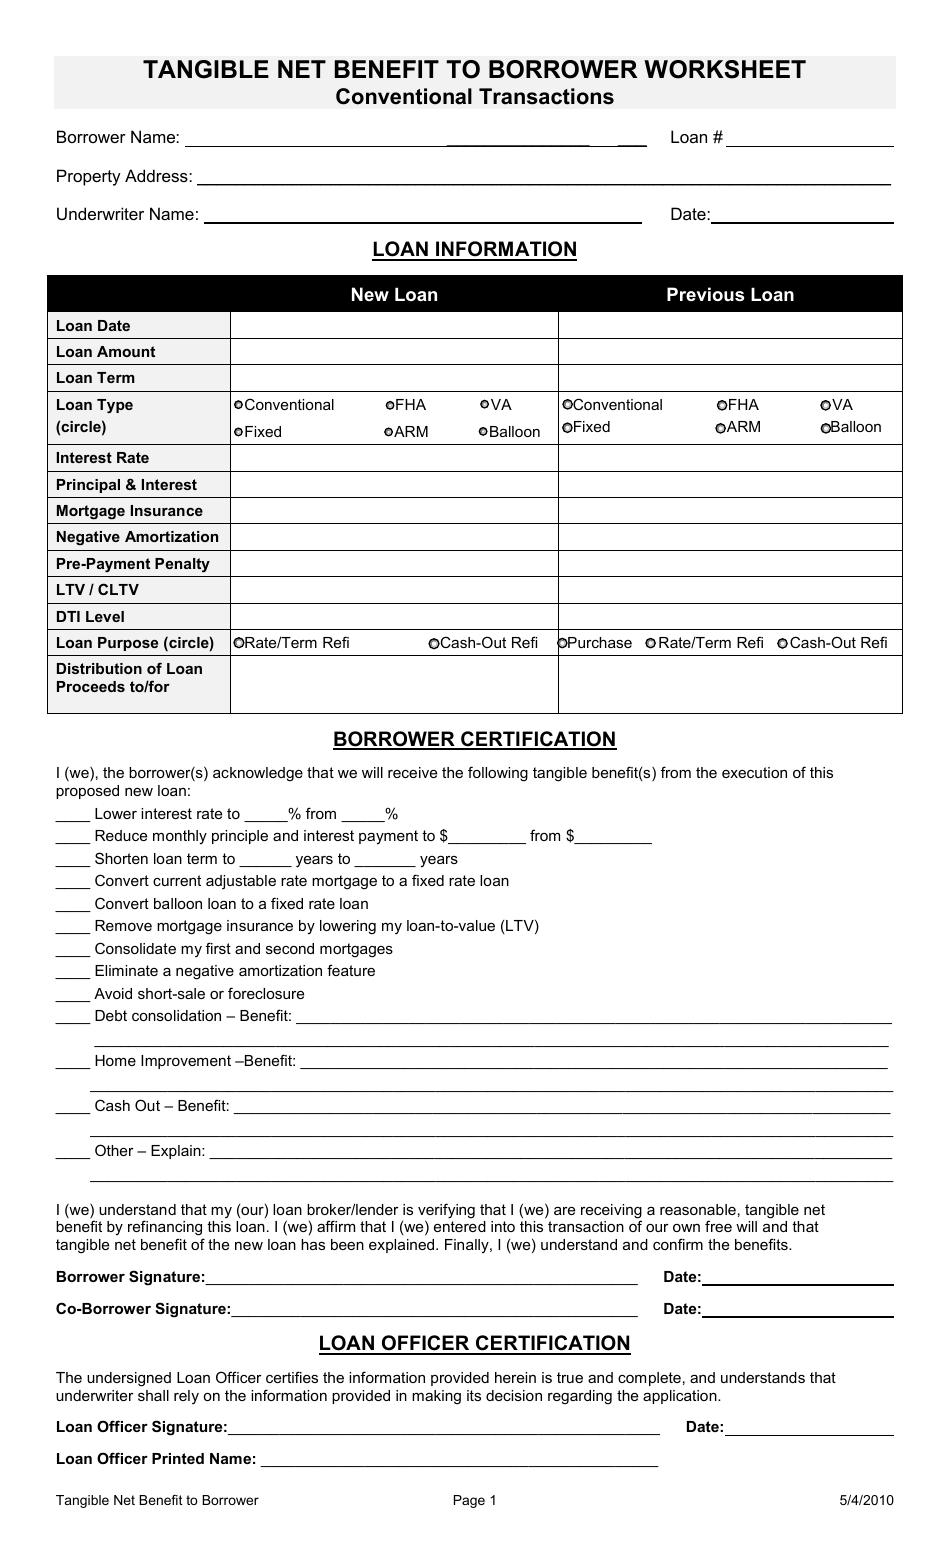 Tangible Net Benefit Form to Borrower Worksheet, Page 1